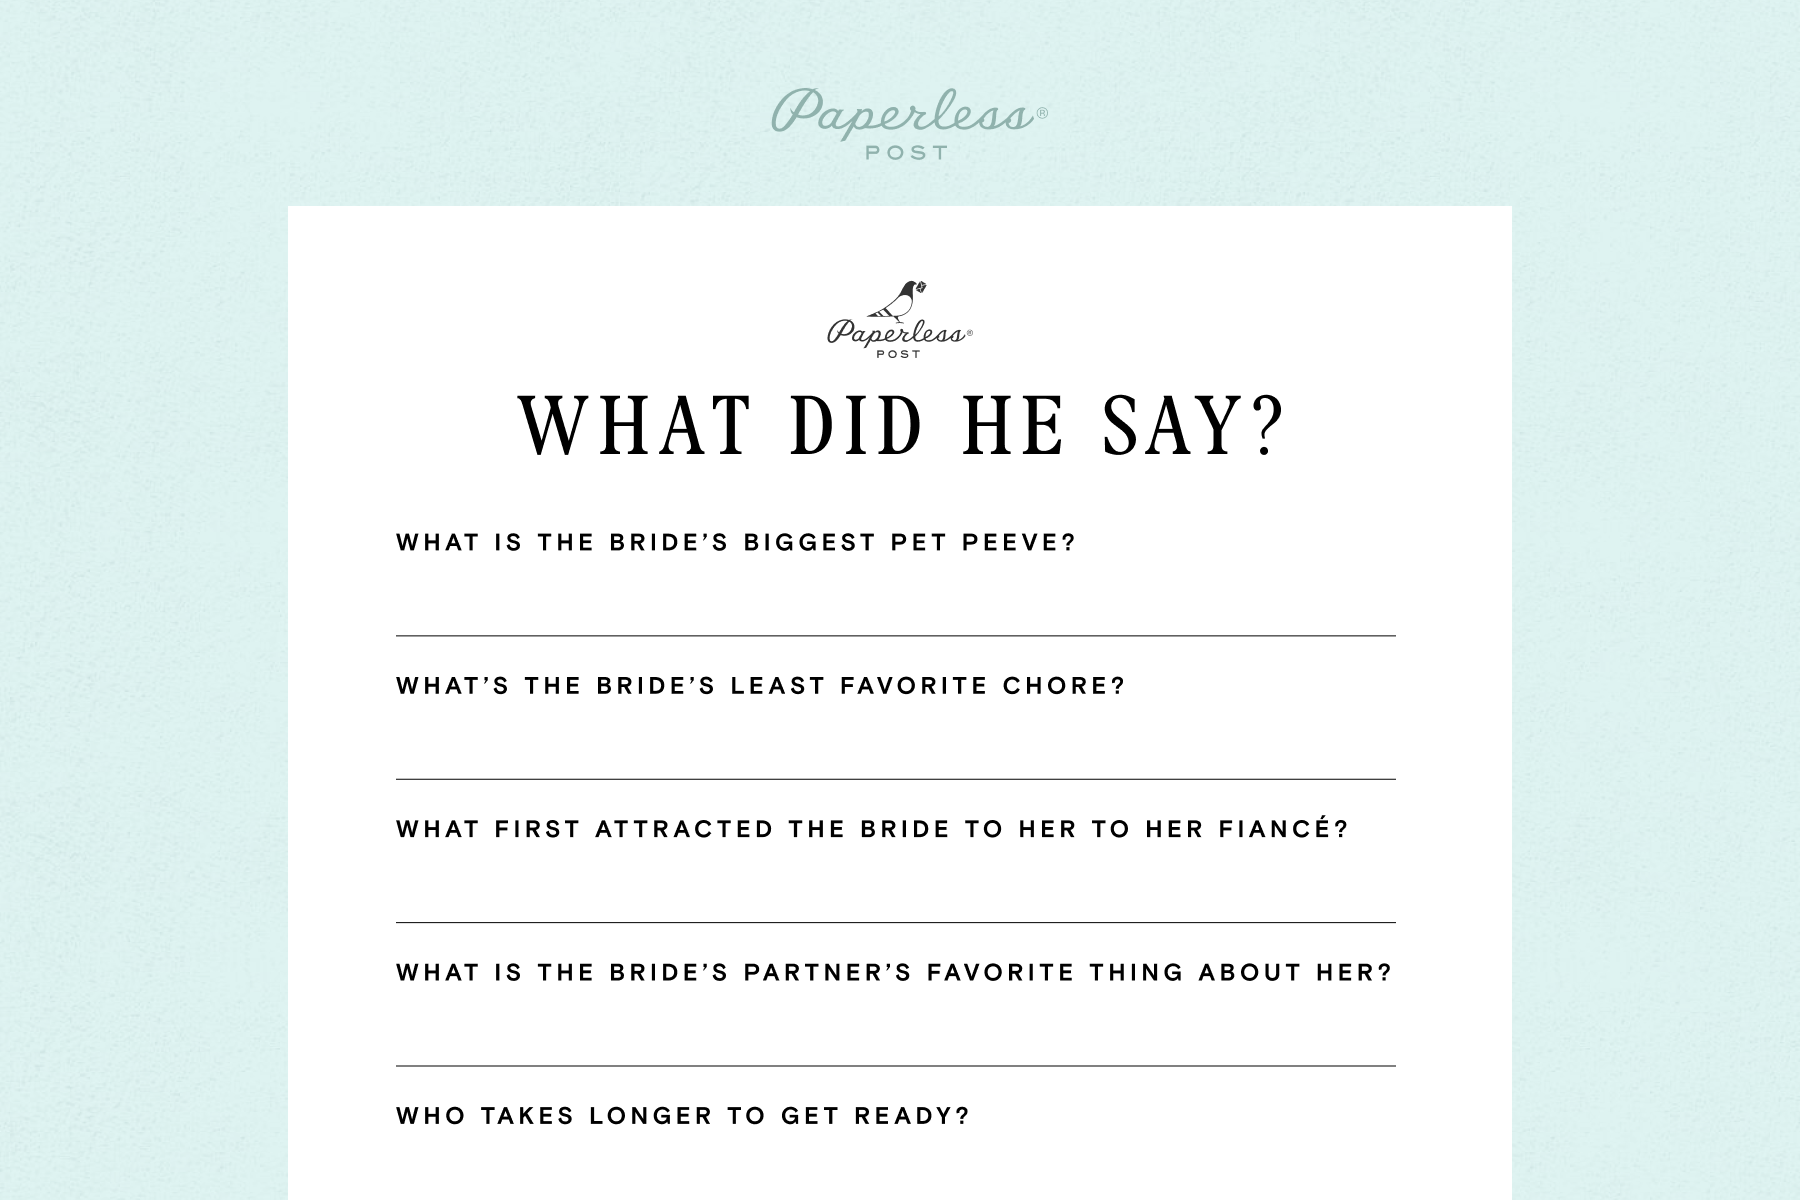 A partial view of a print-out sheet for a game with questions filled out by the groom called WHAT DID HE SAY?